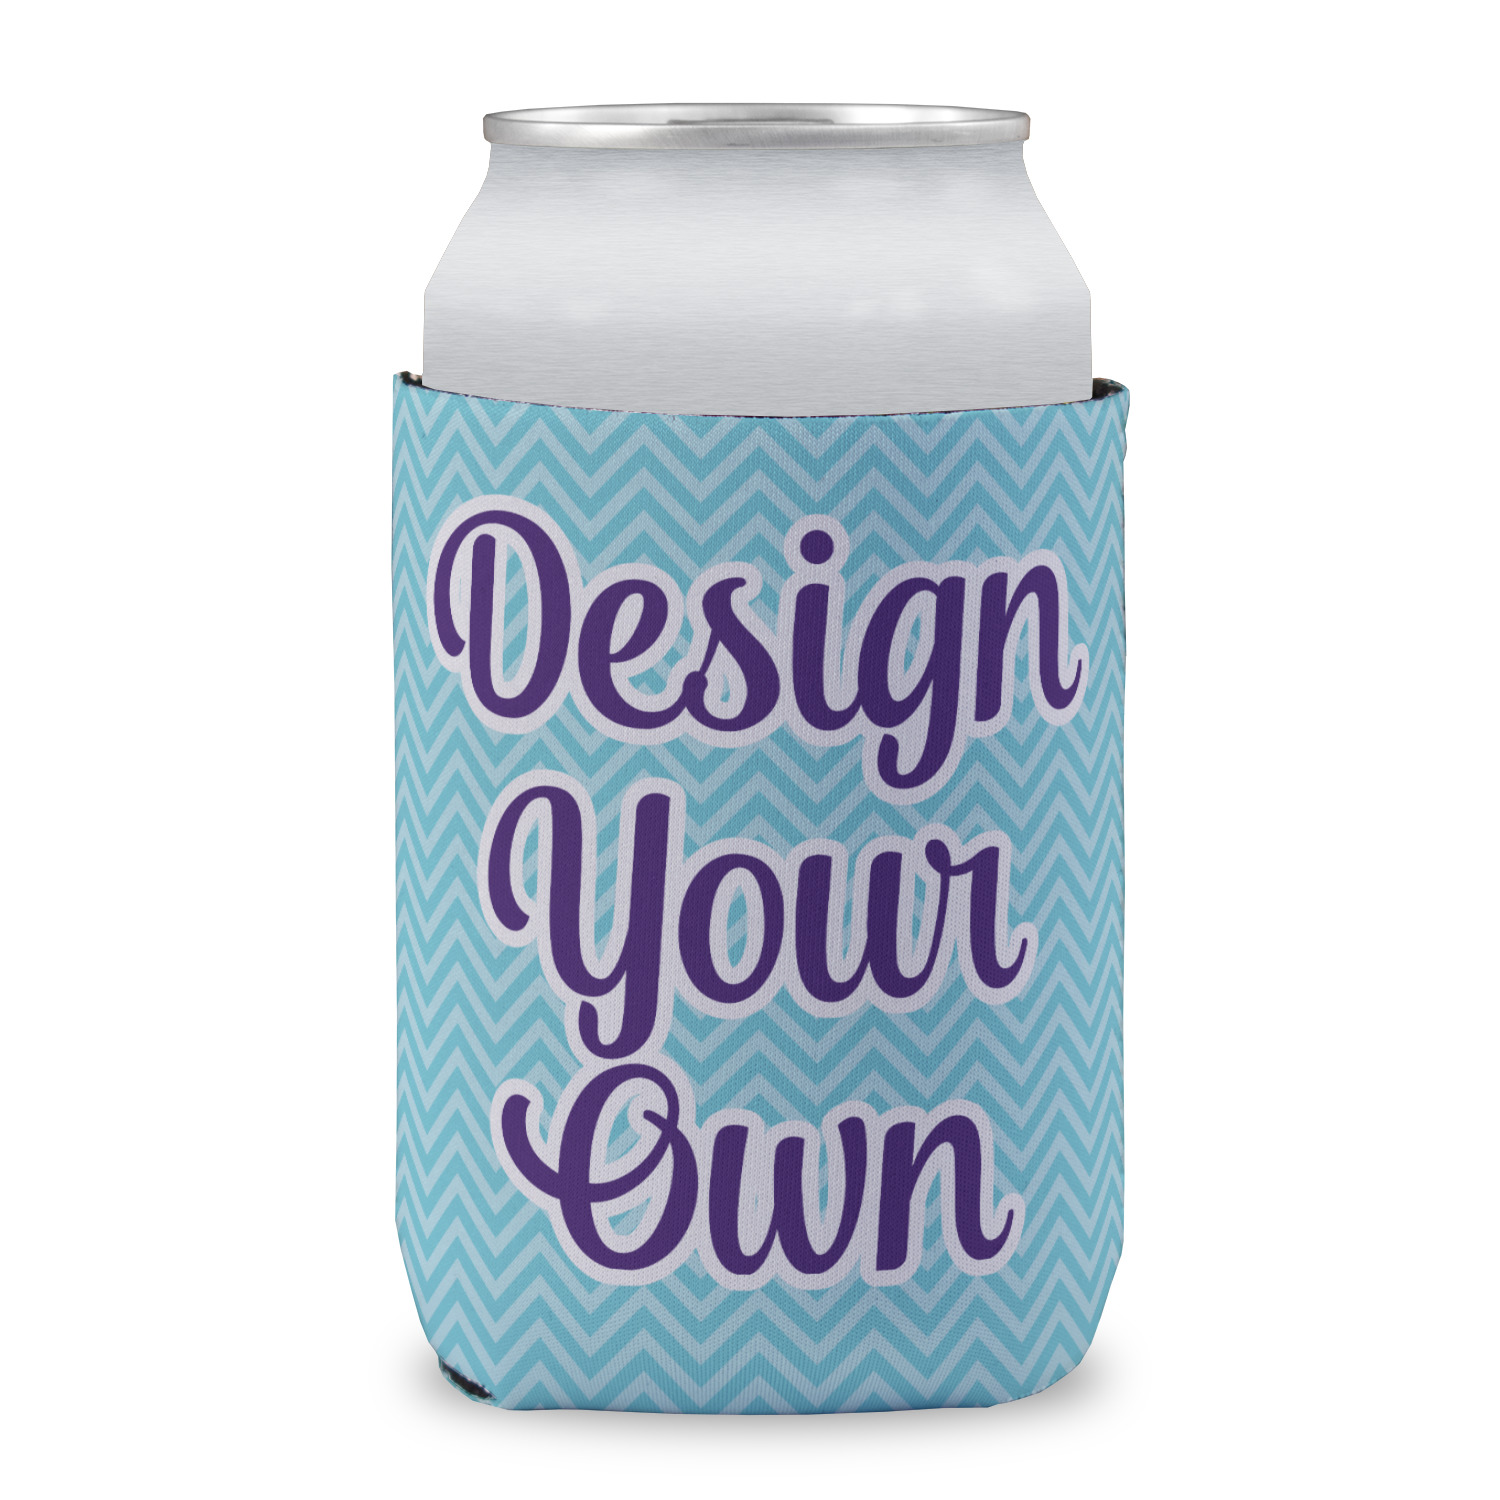 https://www.youcustomizeit.com/common/MAKE/965833/Design-Your-Own-Can-Sleeve.jpg?lm=1668750574